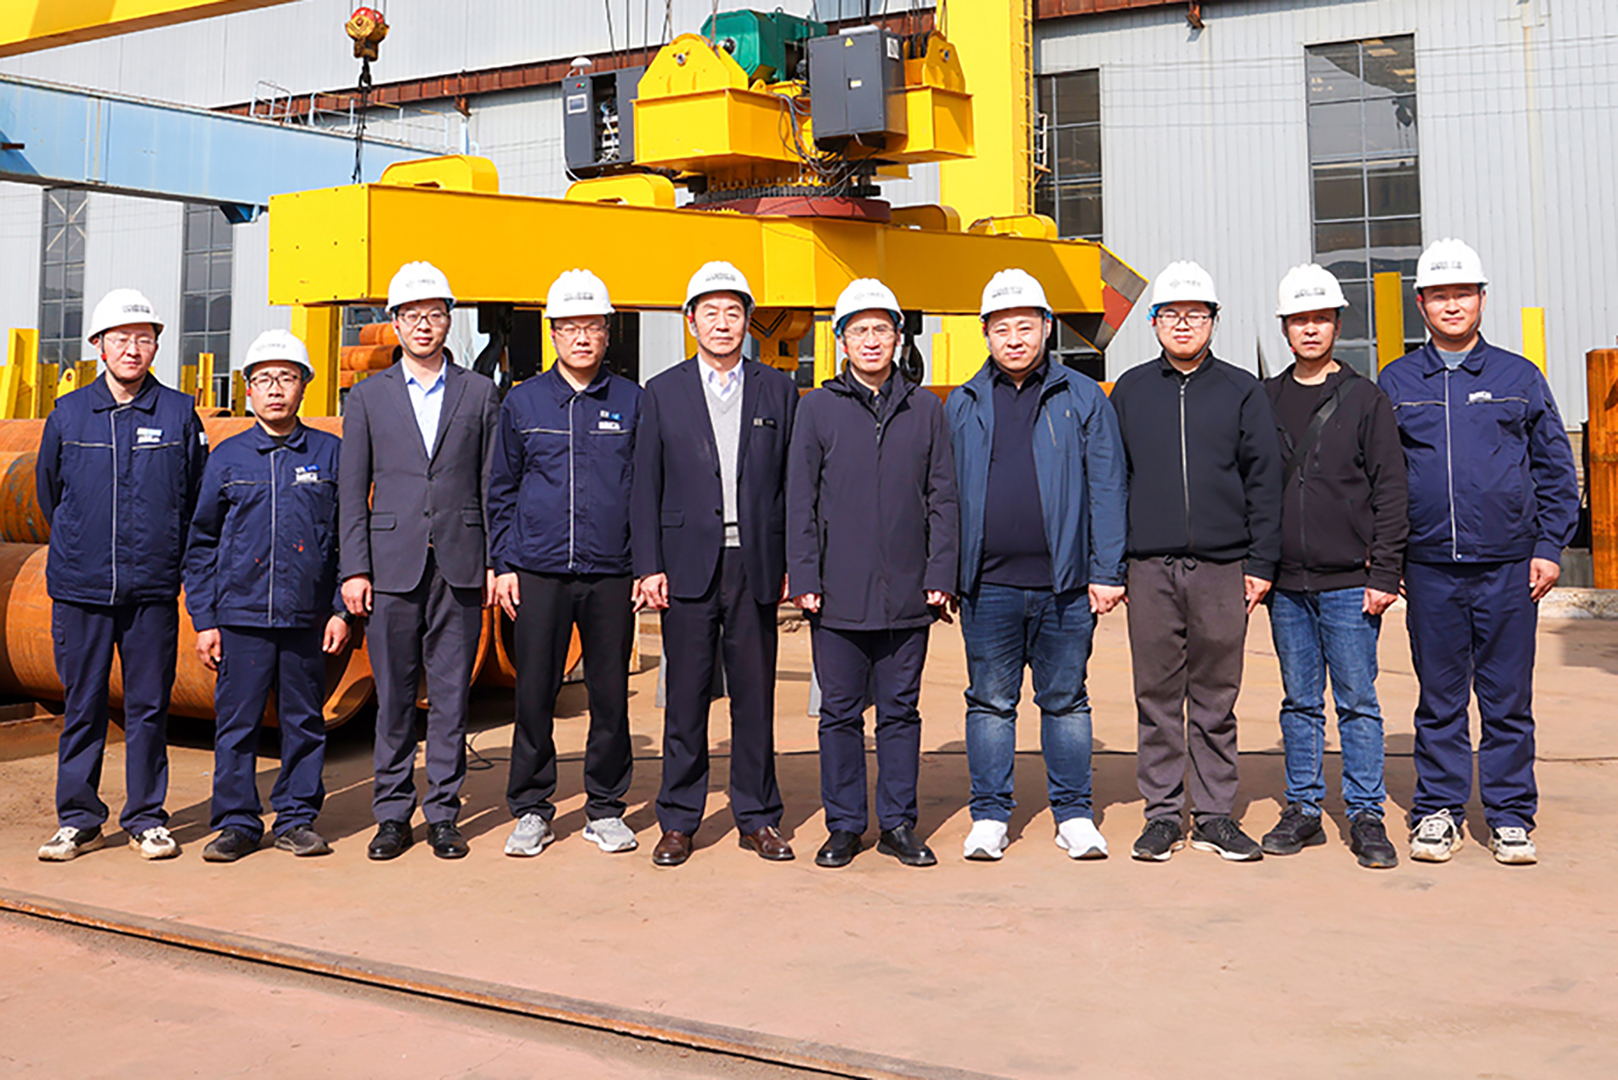 Good news! Load testing of a rotating crane manufactured by Henan Mining Company for China Aerospace was completely successful